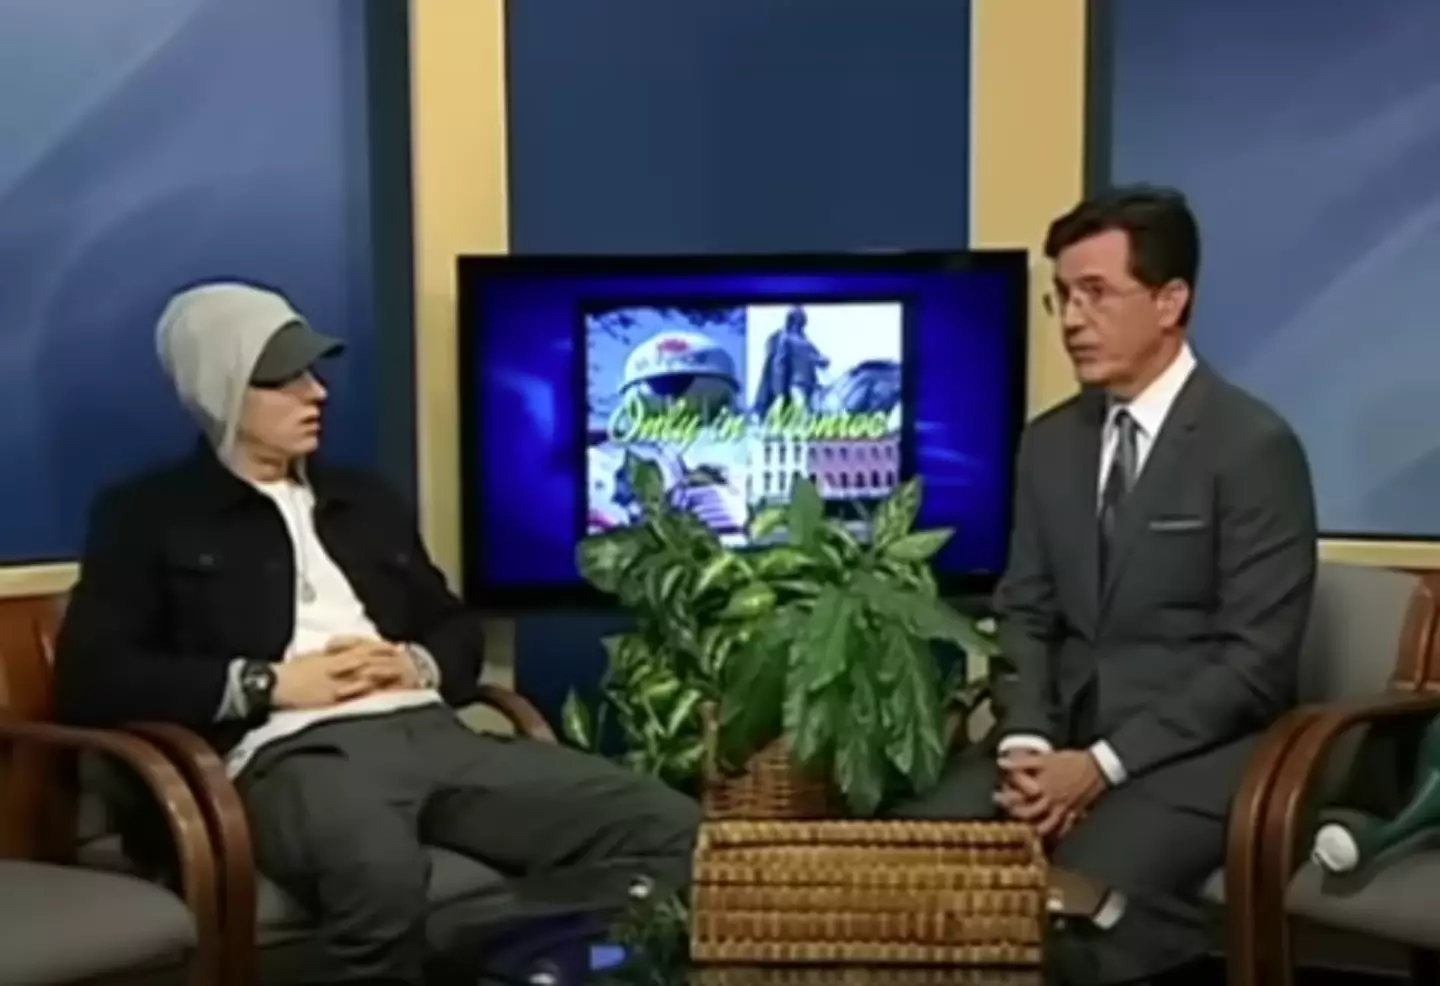 Colbert pretended not to know who Eminem was.